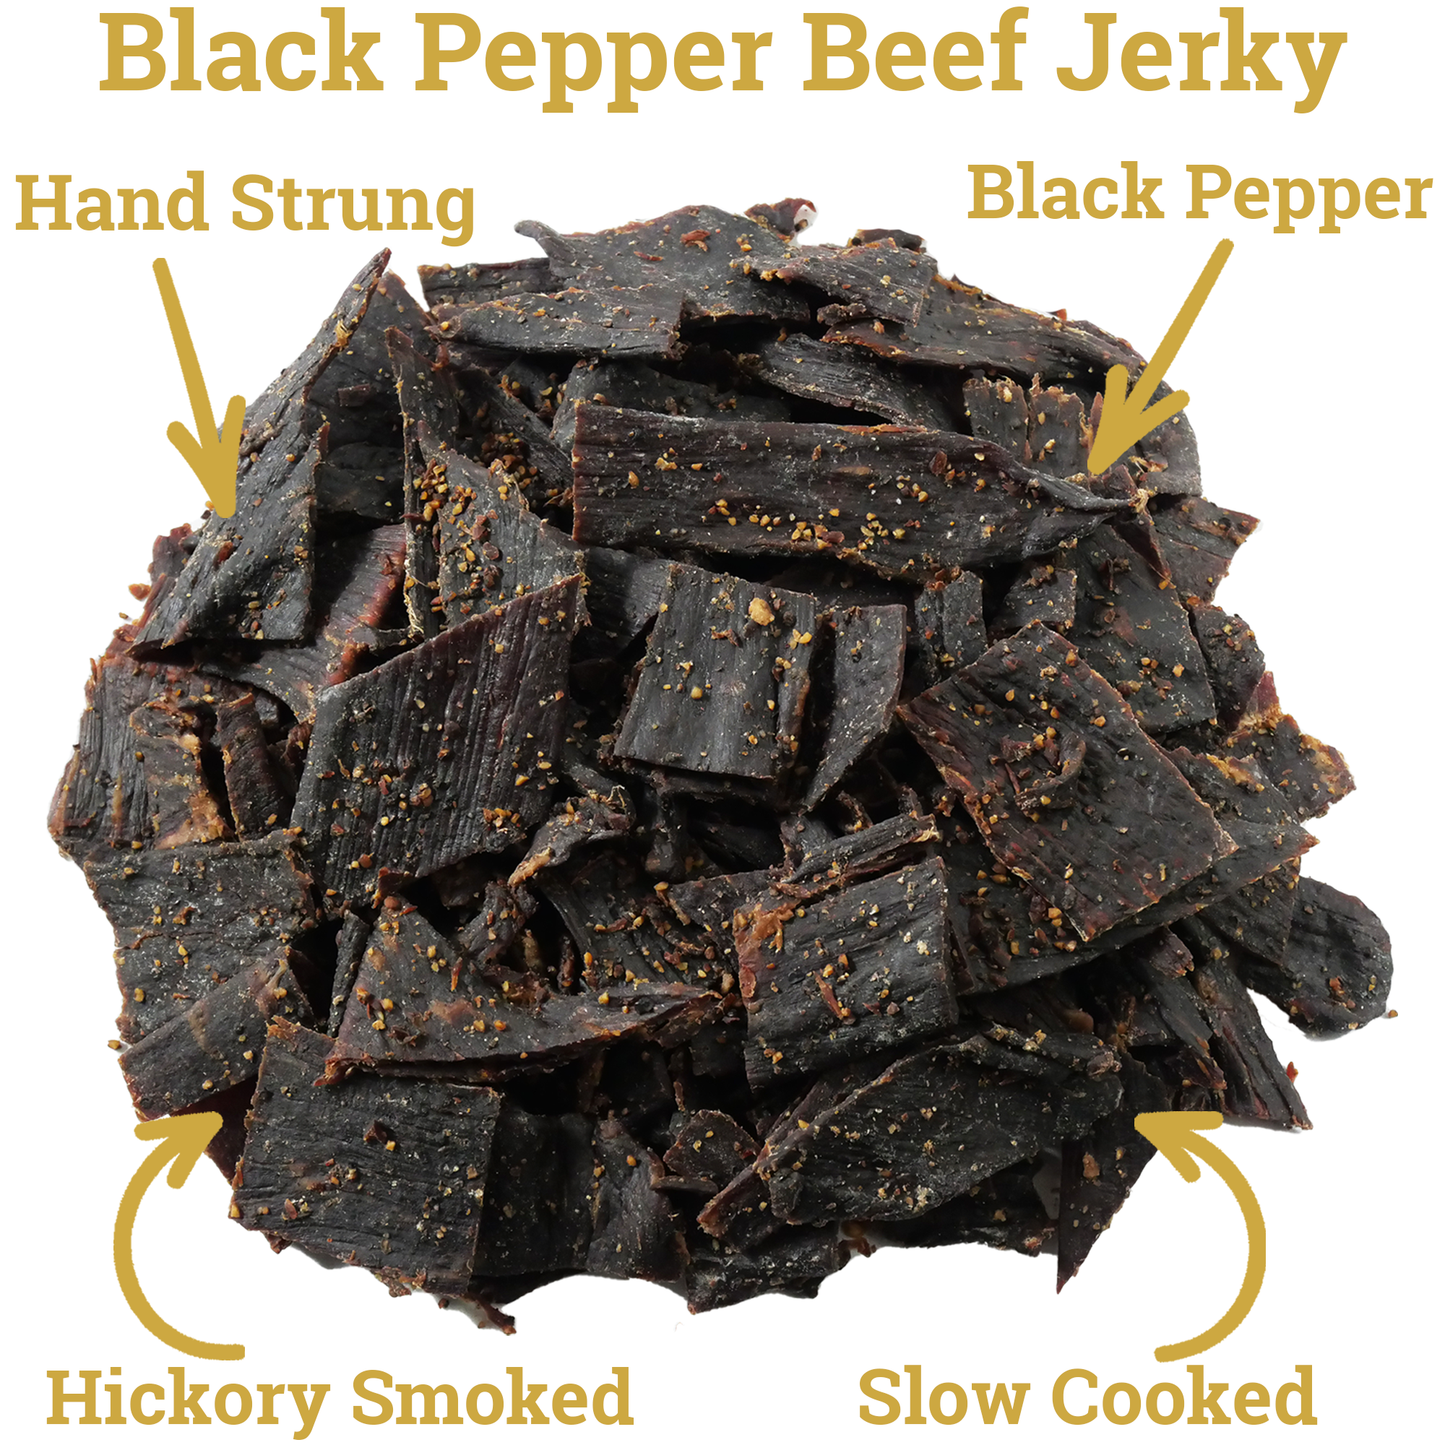 Lone Star Black Pepper Beef Jerky - 1 Pound Resealable Bag - Classic Handcrafted Flavor - Made in the USA